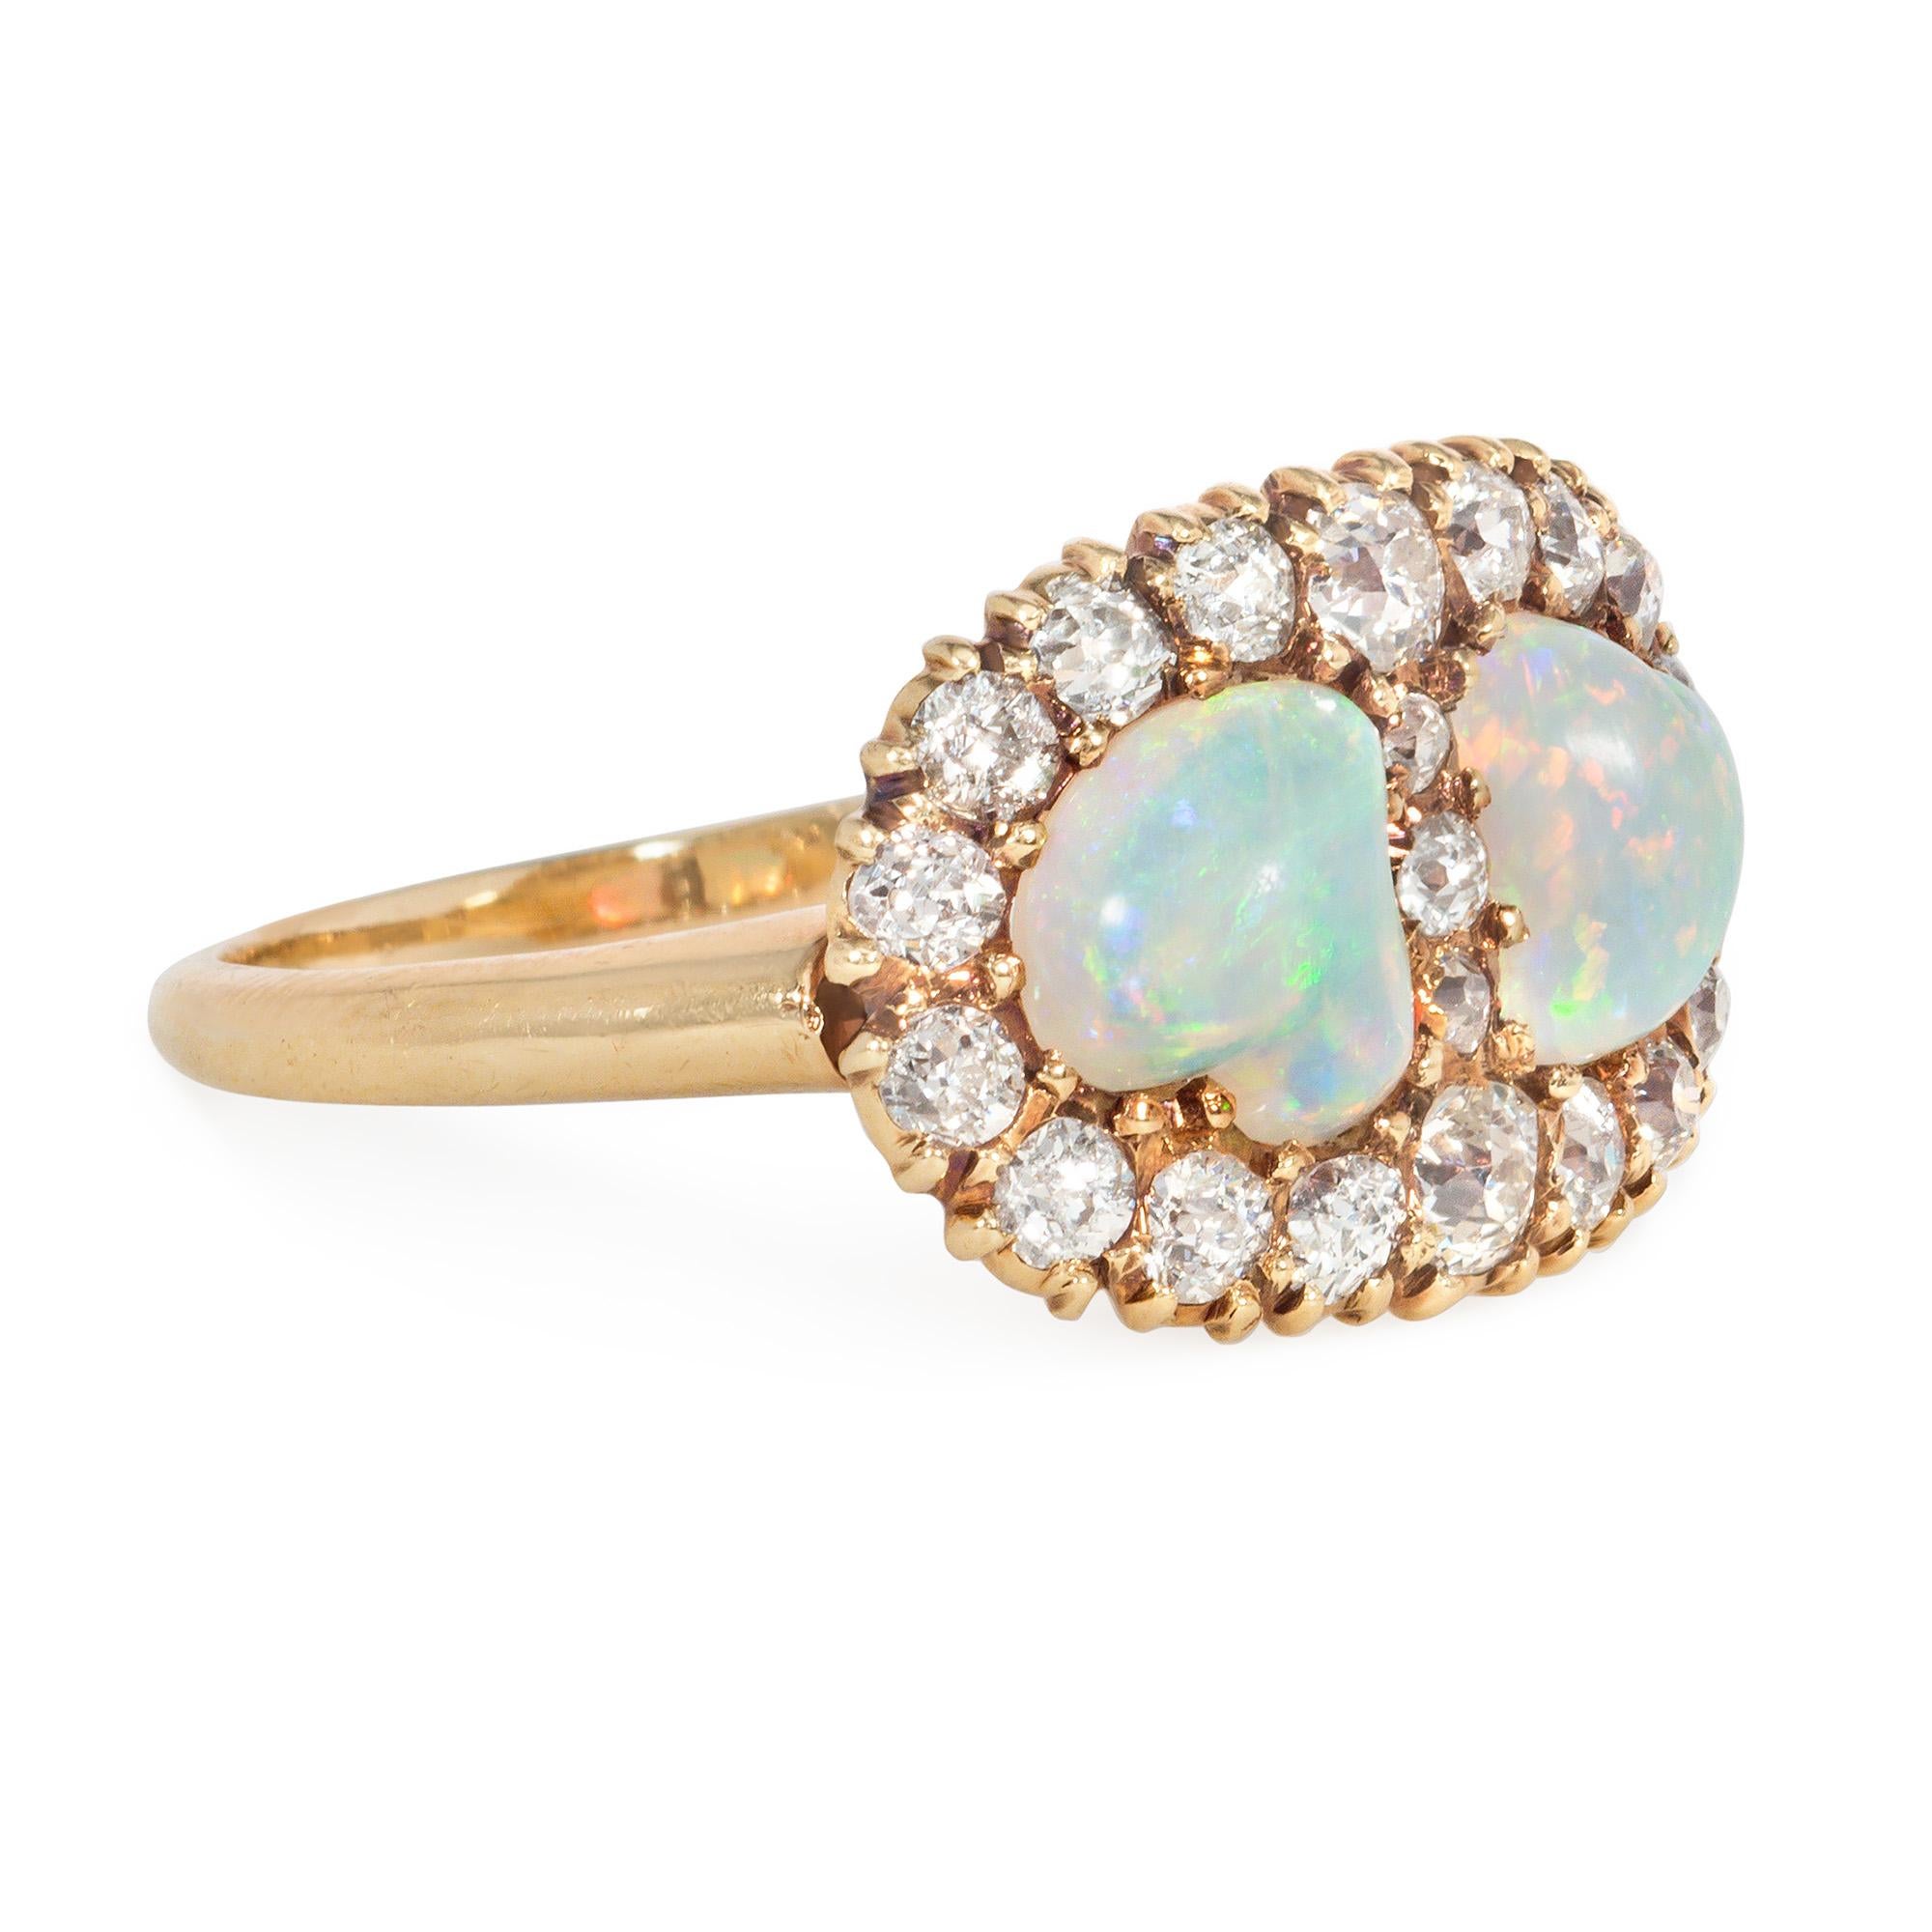 An antique late Victorian period gold, diamond, and opal 